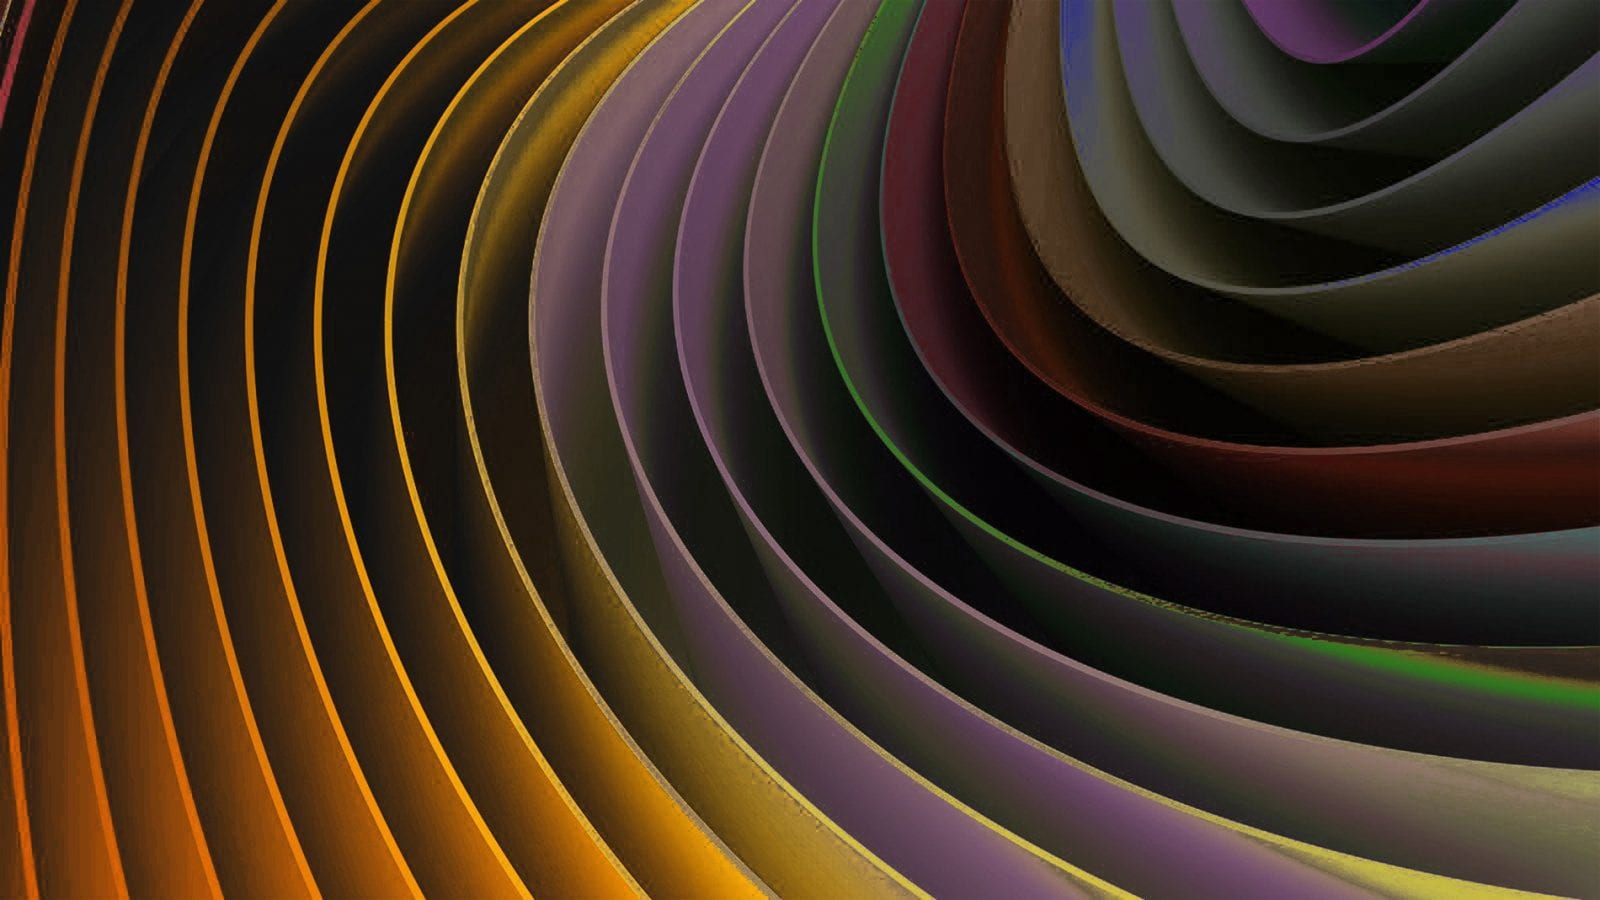 abstract image of swirling multicolored curves